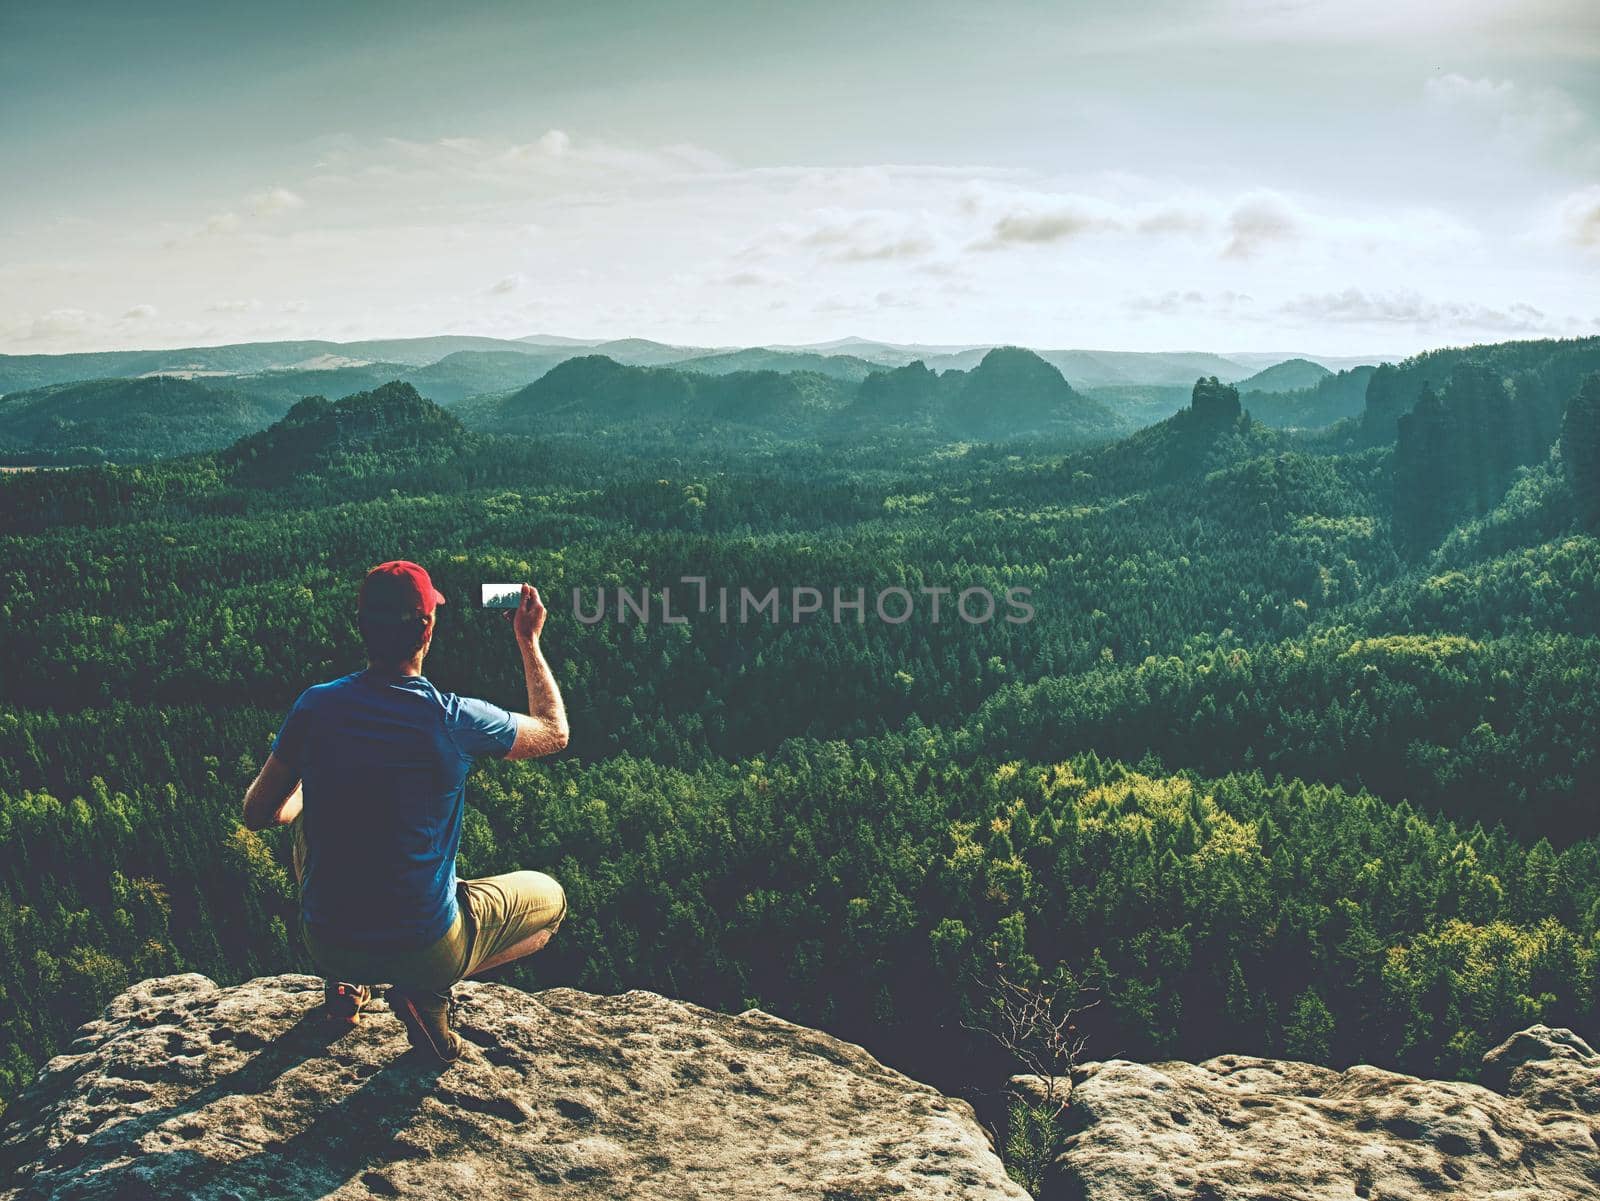 Hiking man taking panoramic picture of mountain landscape using smartphone.